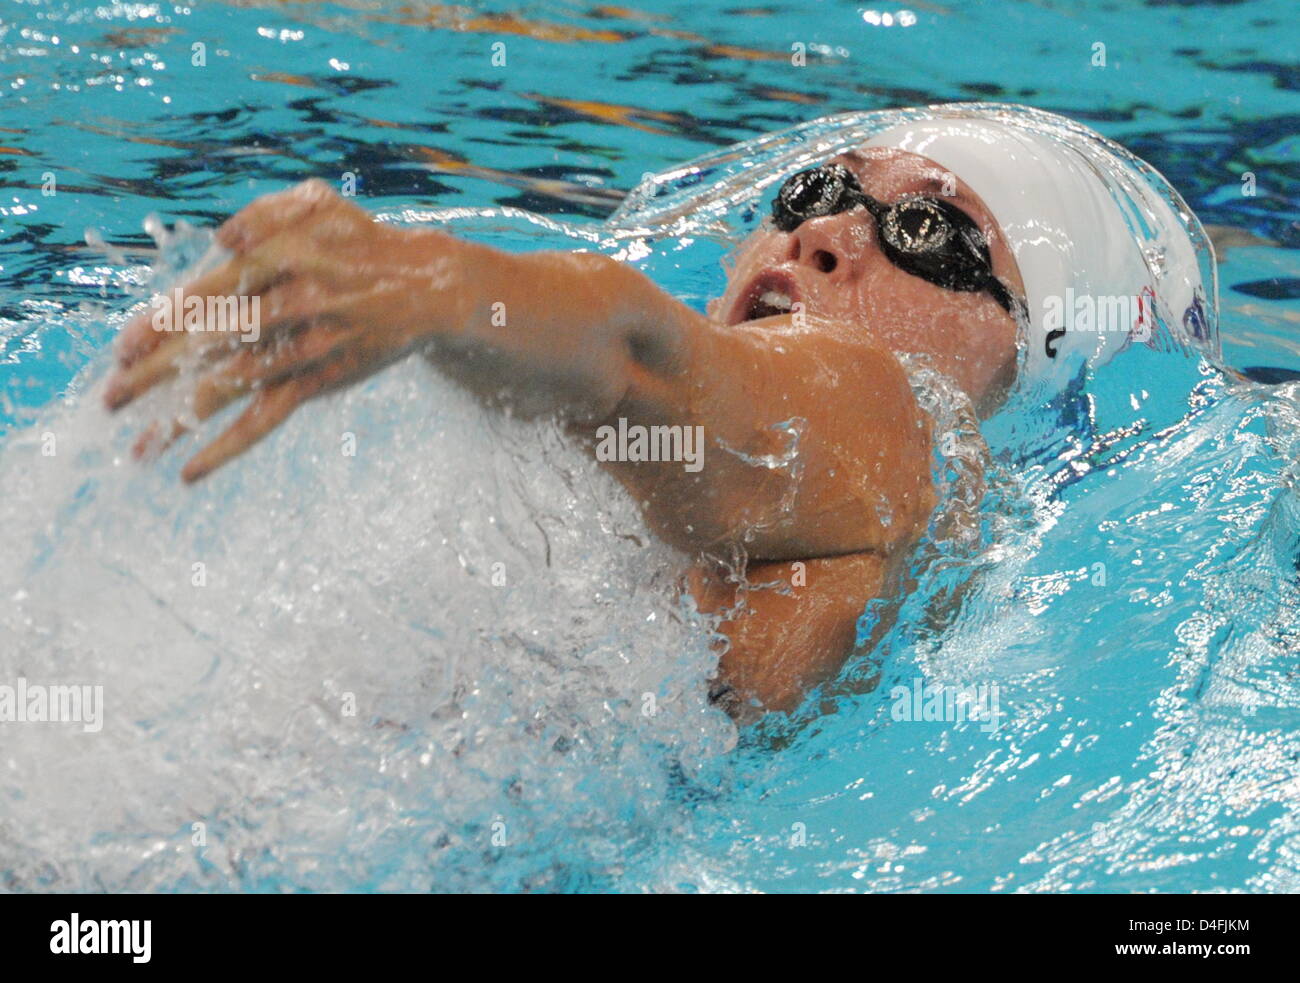 Natalie Coughlin from the USA during a womens 100m backstroke heat at the National Aquatics Center during the 2008 Olympic Games in Beijing, China, 10 August 2008. Photo: Bernd Thissen dpa (c) dpa - Bildfunk Stock Photo